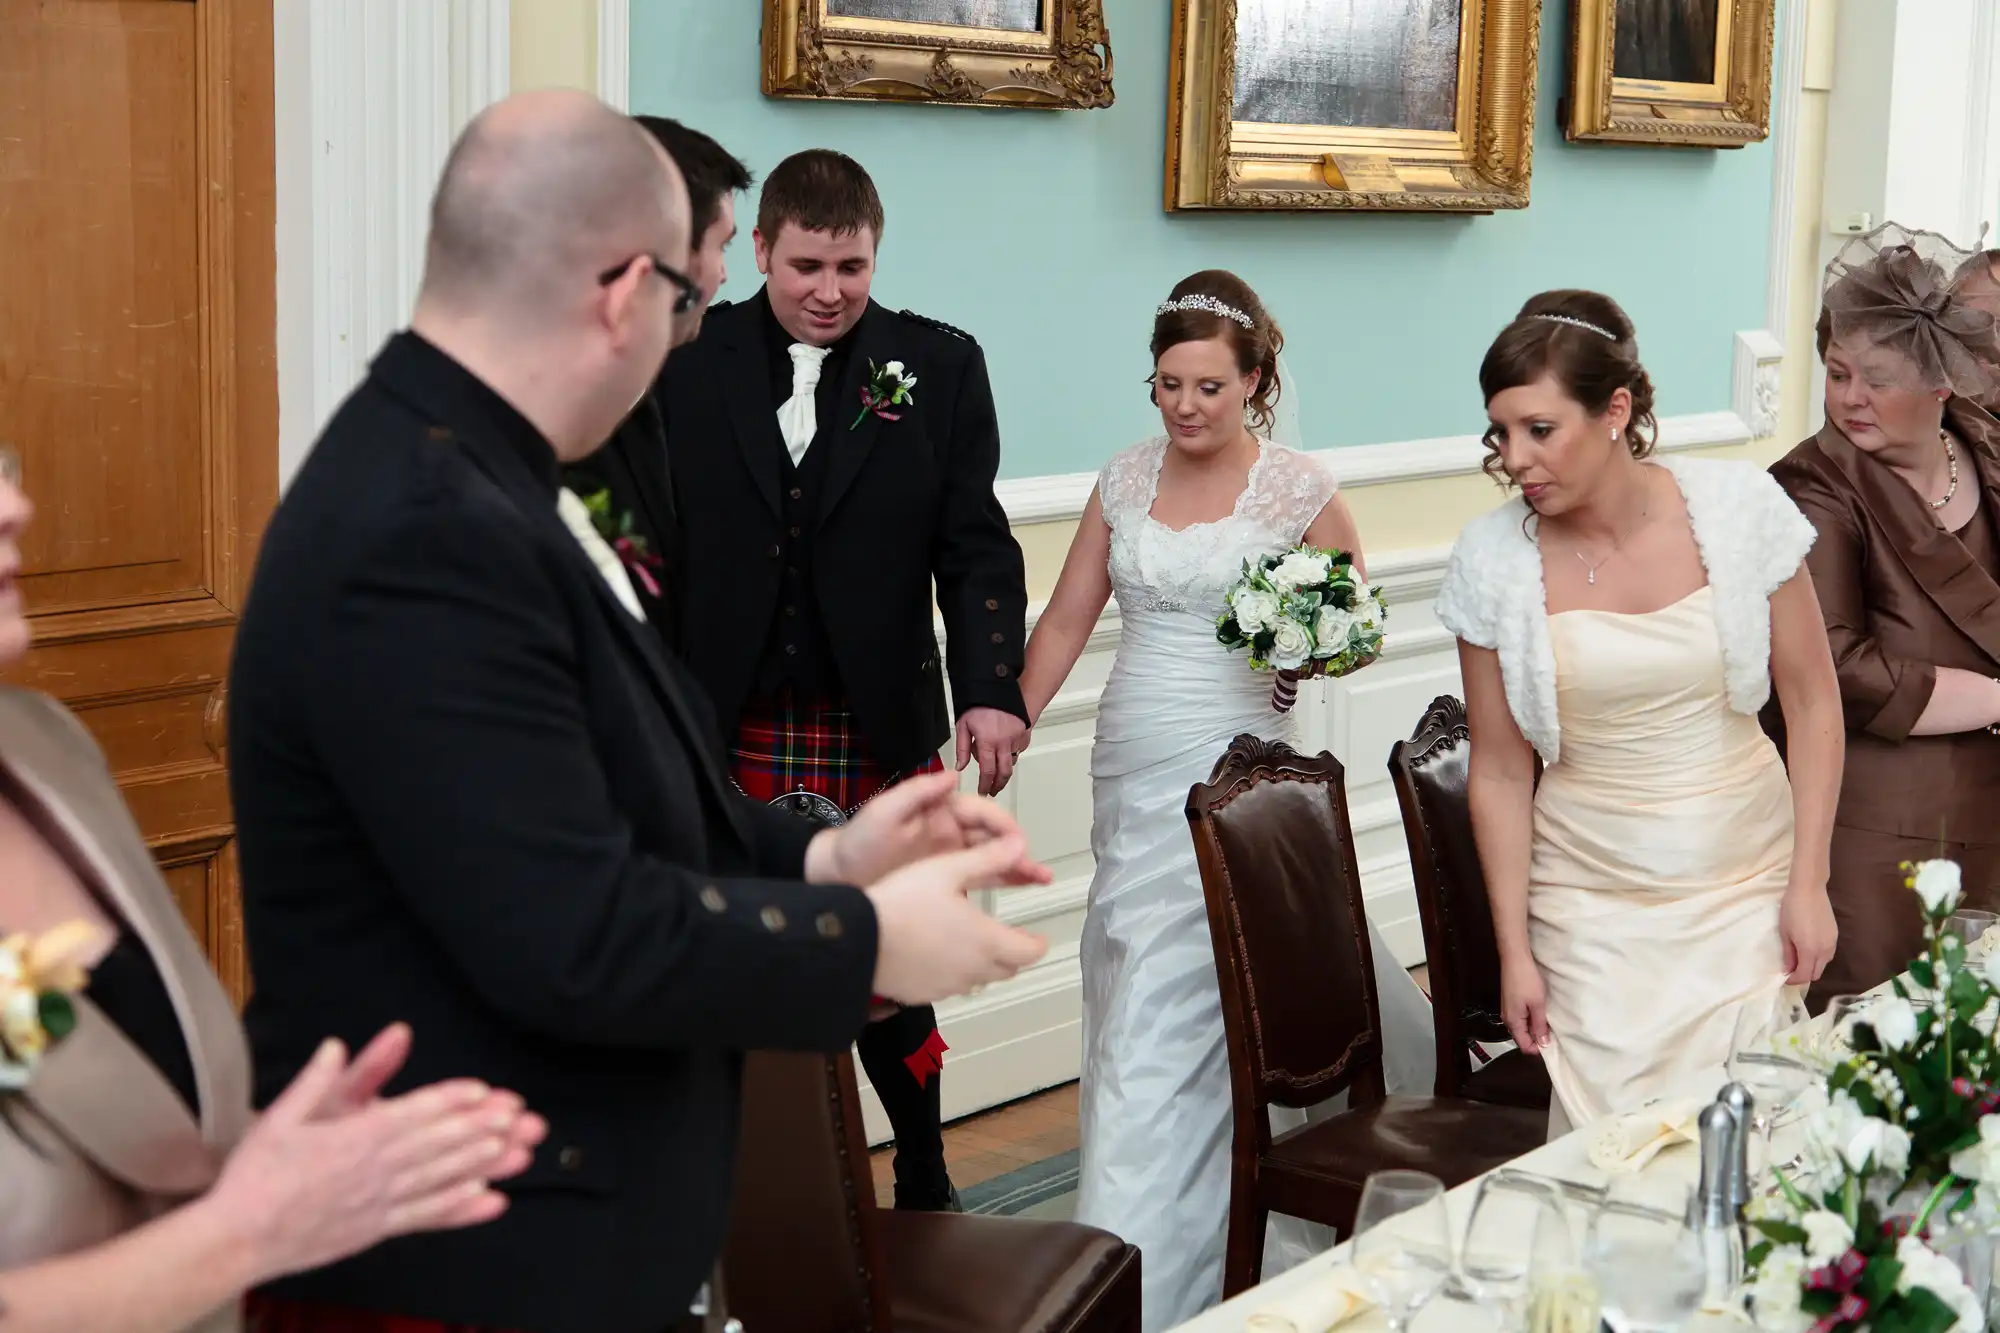 A bride and groom, followed by guests, walk through a reception room as a man gestures towards an empty chair.